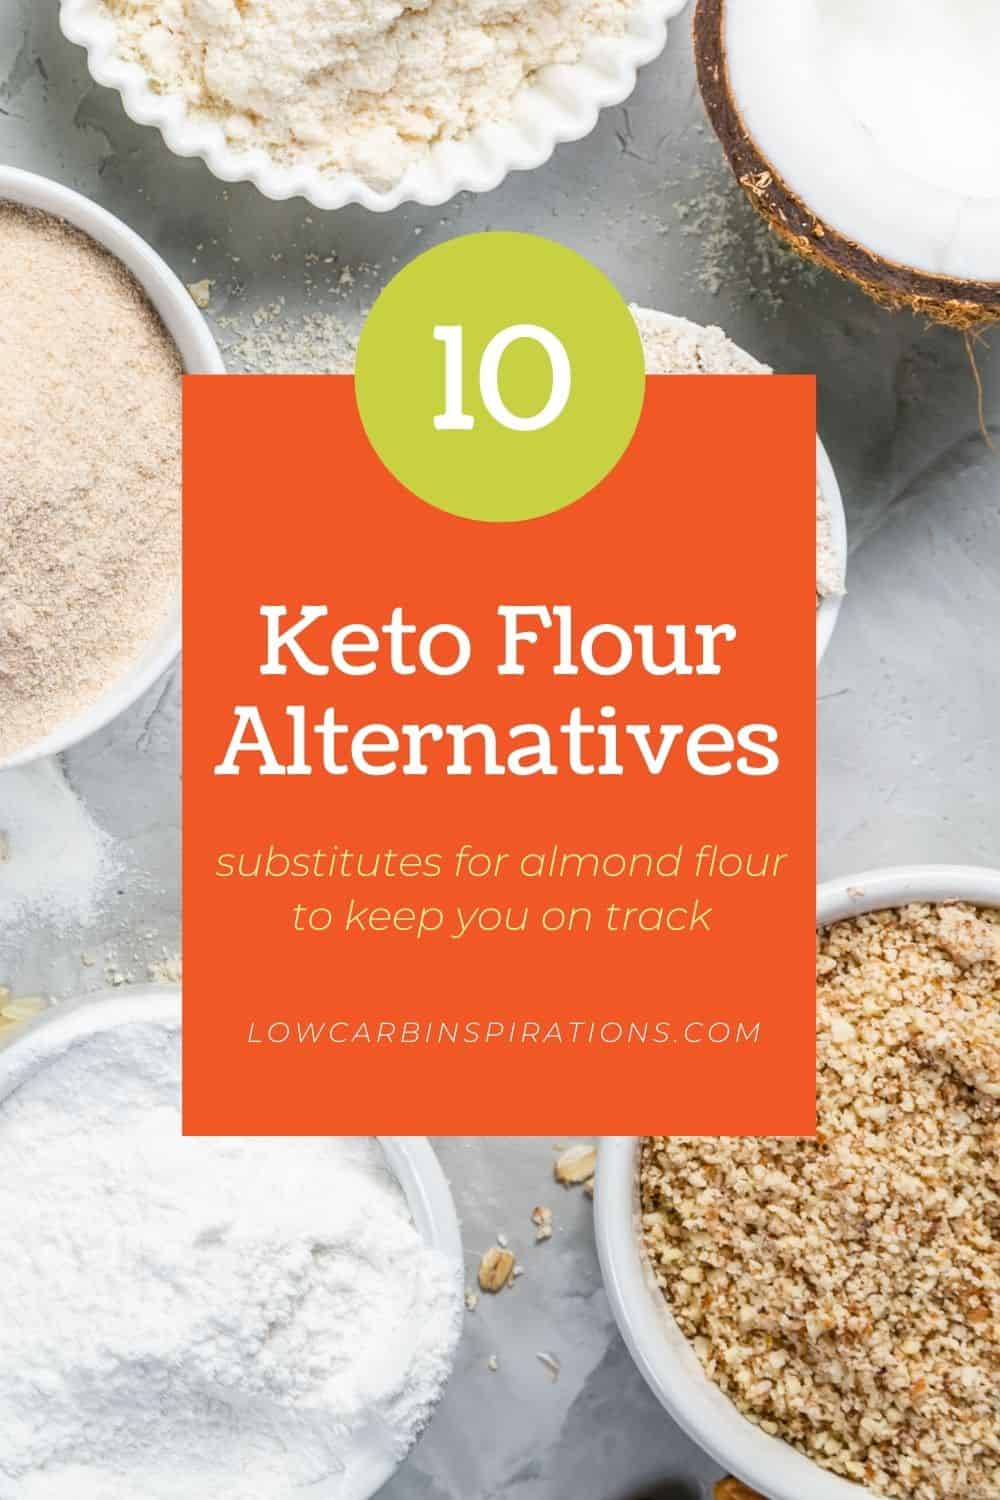 Top 10 Keto Flour Substitutes for the Ketogenic Diet